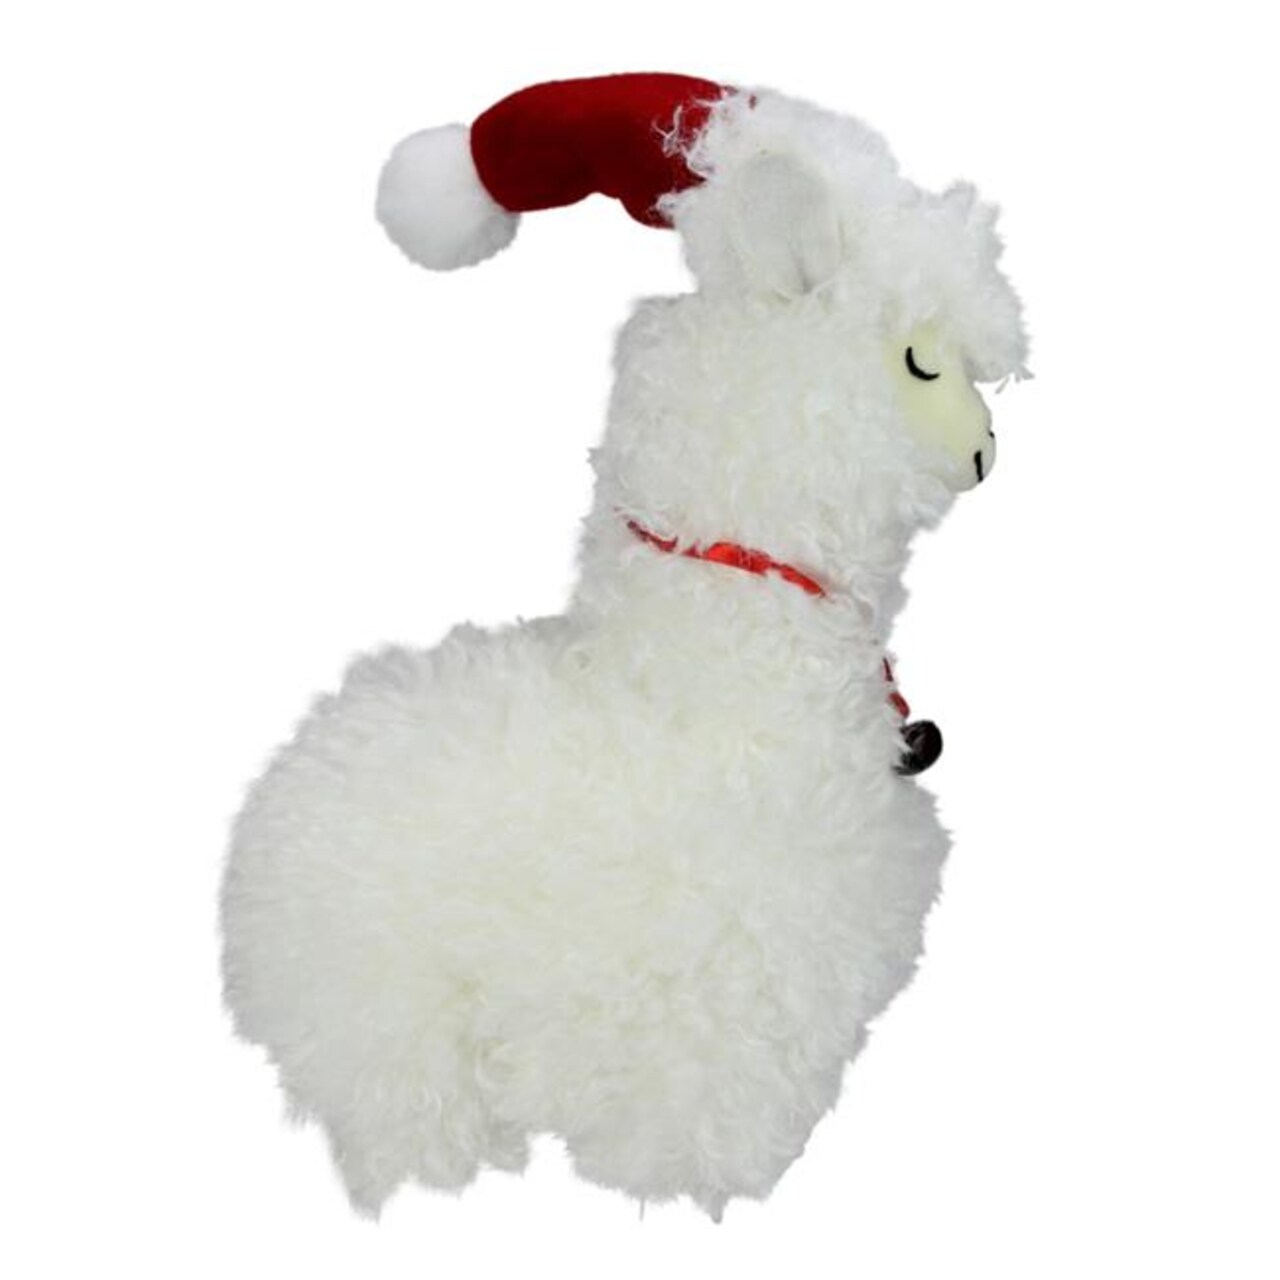 Northlight 32913474 13 in. Plush Standing Llama with Jingle Bell Necklace Christmas Tabletop Figure